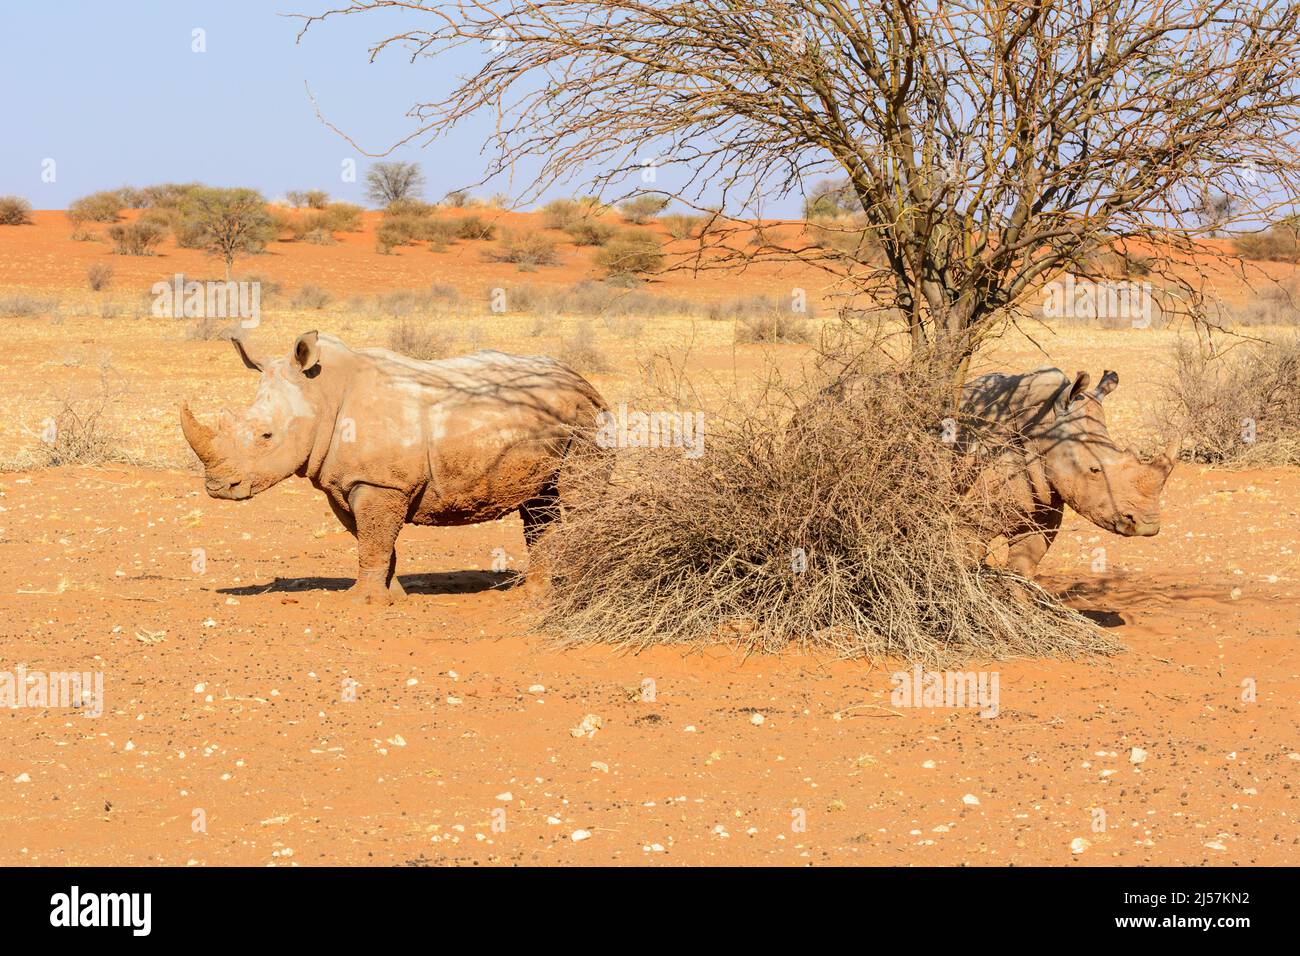 Two white rhinoceroses (Ceratotherium simum) covered in mud standing in the red sand dunes of the Kalahari Desert, Namibia, Southern Africa Stock Photo